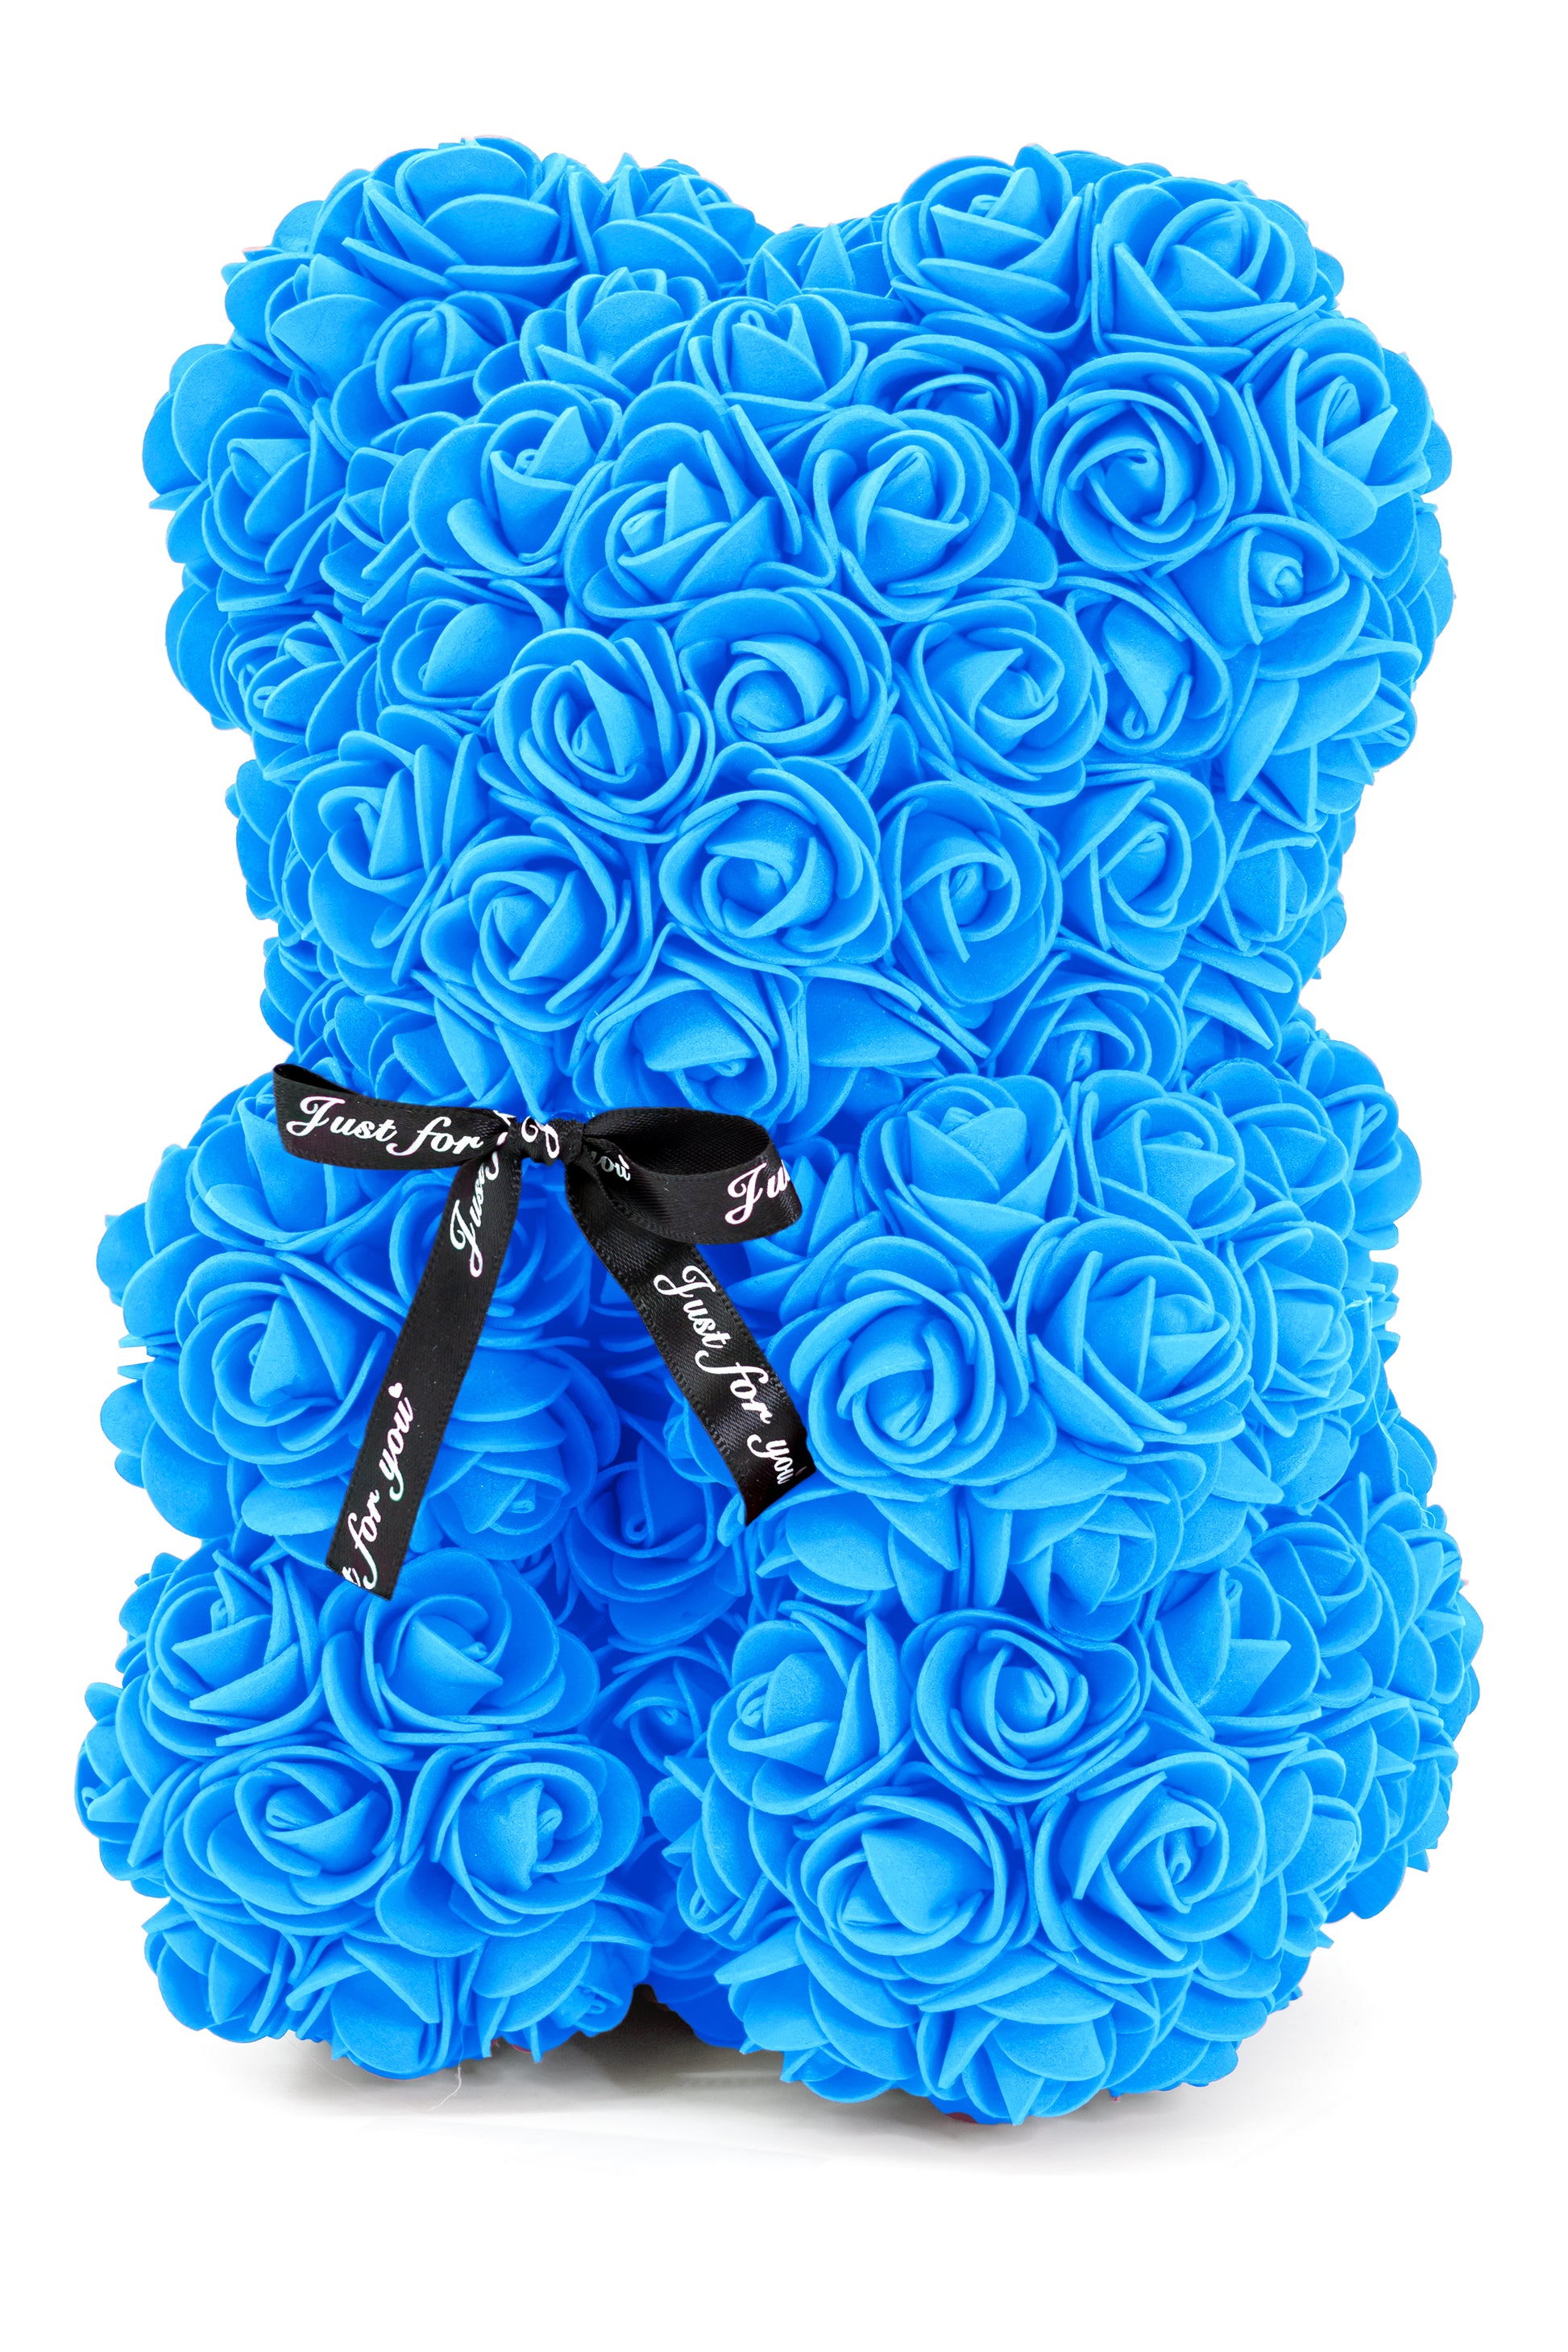 A flower bear decoration covered in blue foam shaped roses